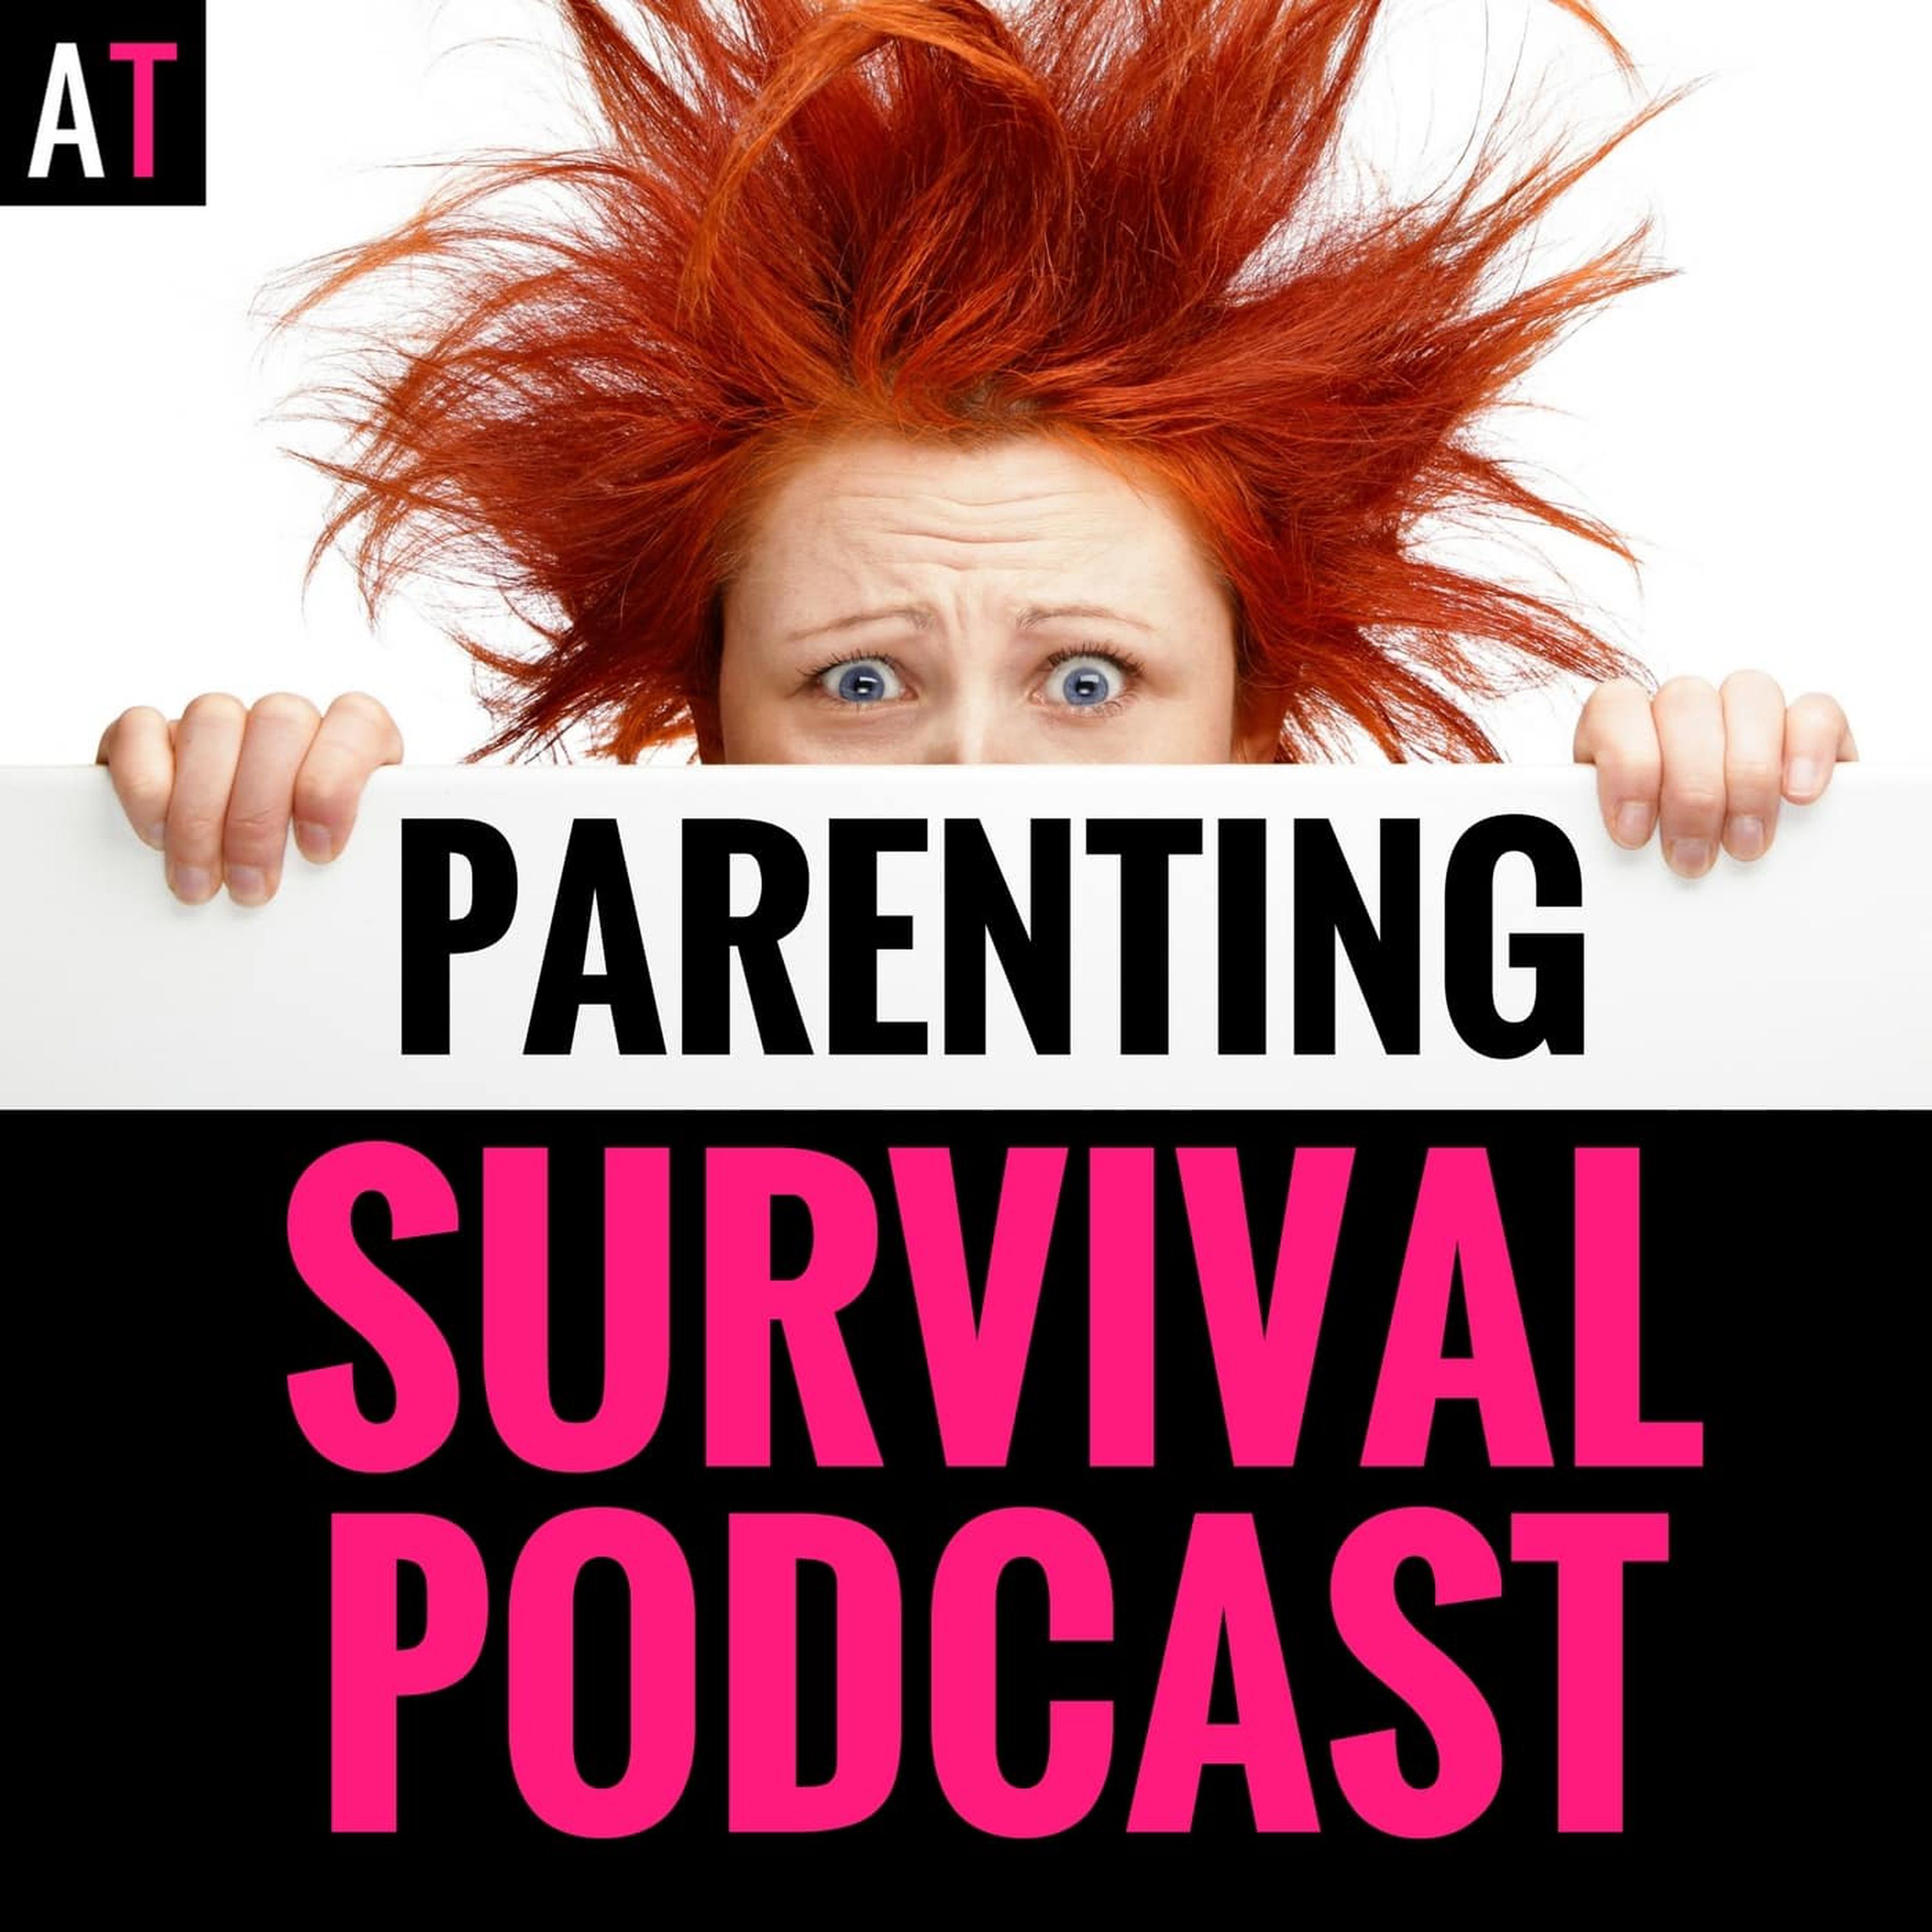 PSP 048: Inside the Mind of an Anxious Child: A Six Year Old Talks About What Helps.